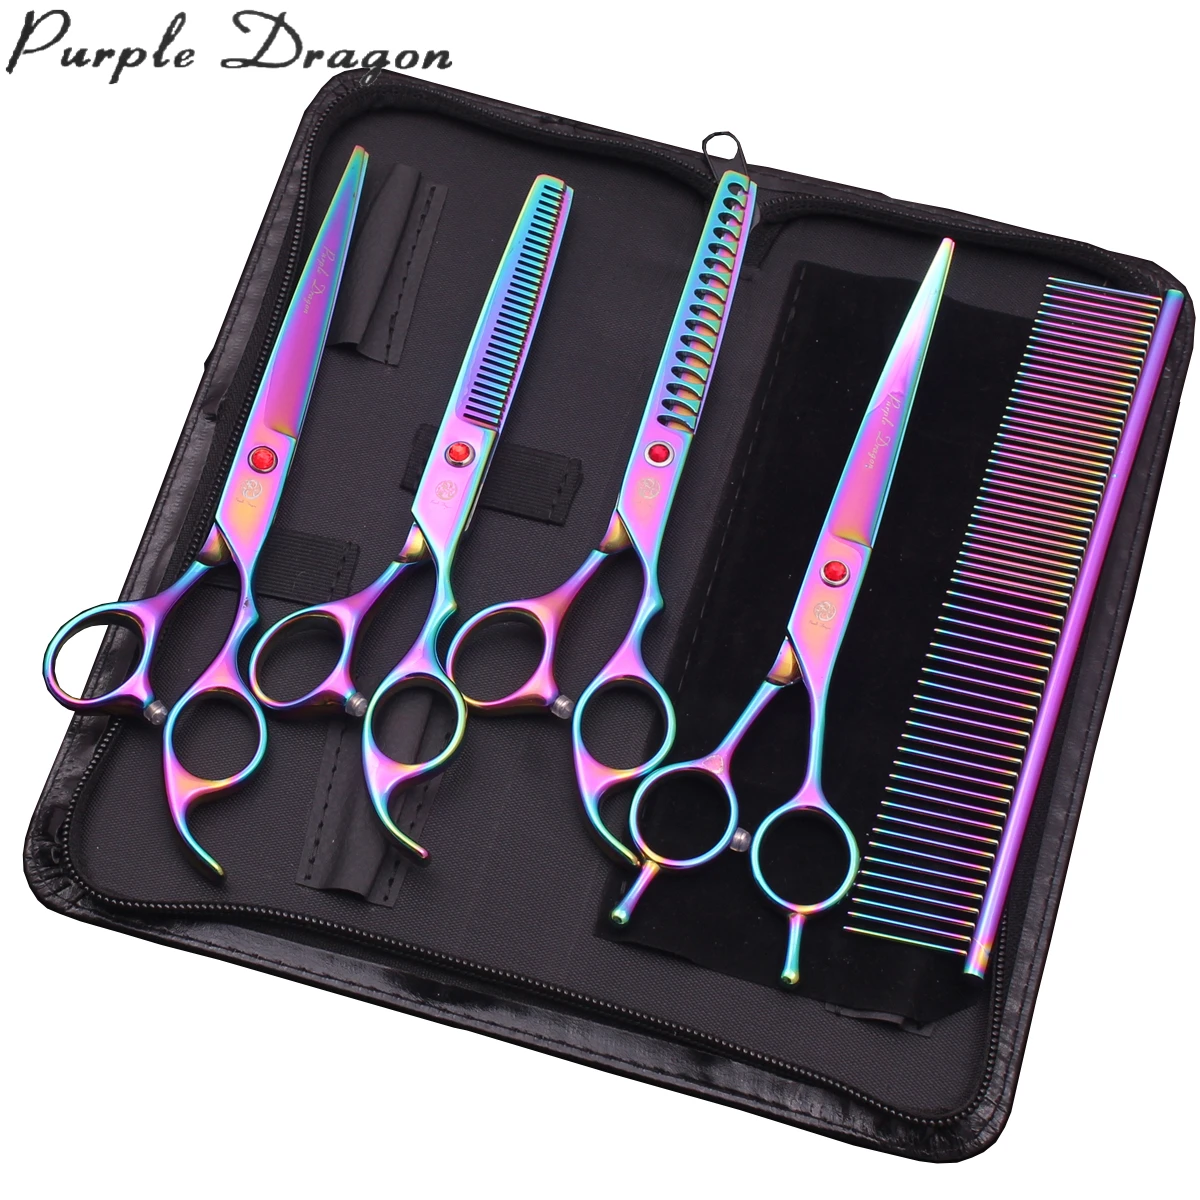 

New Dog Grooming Scissors Kit 7" Purple Dragon Japan Stainless Pet Chunker Thinning Shears Animal Curved Scissors Z3012, Red handle